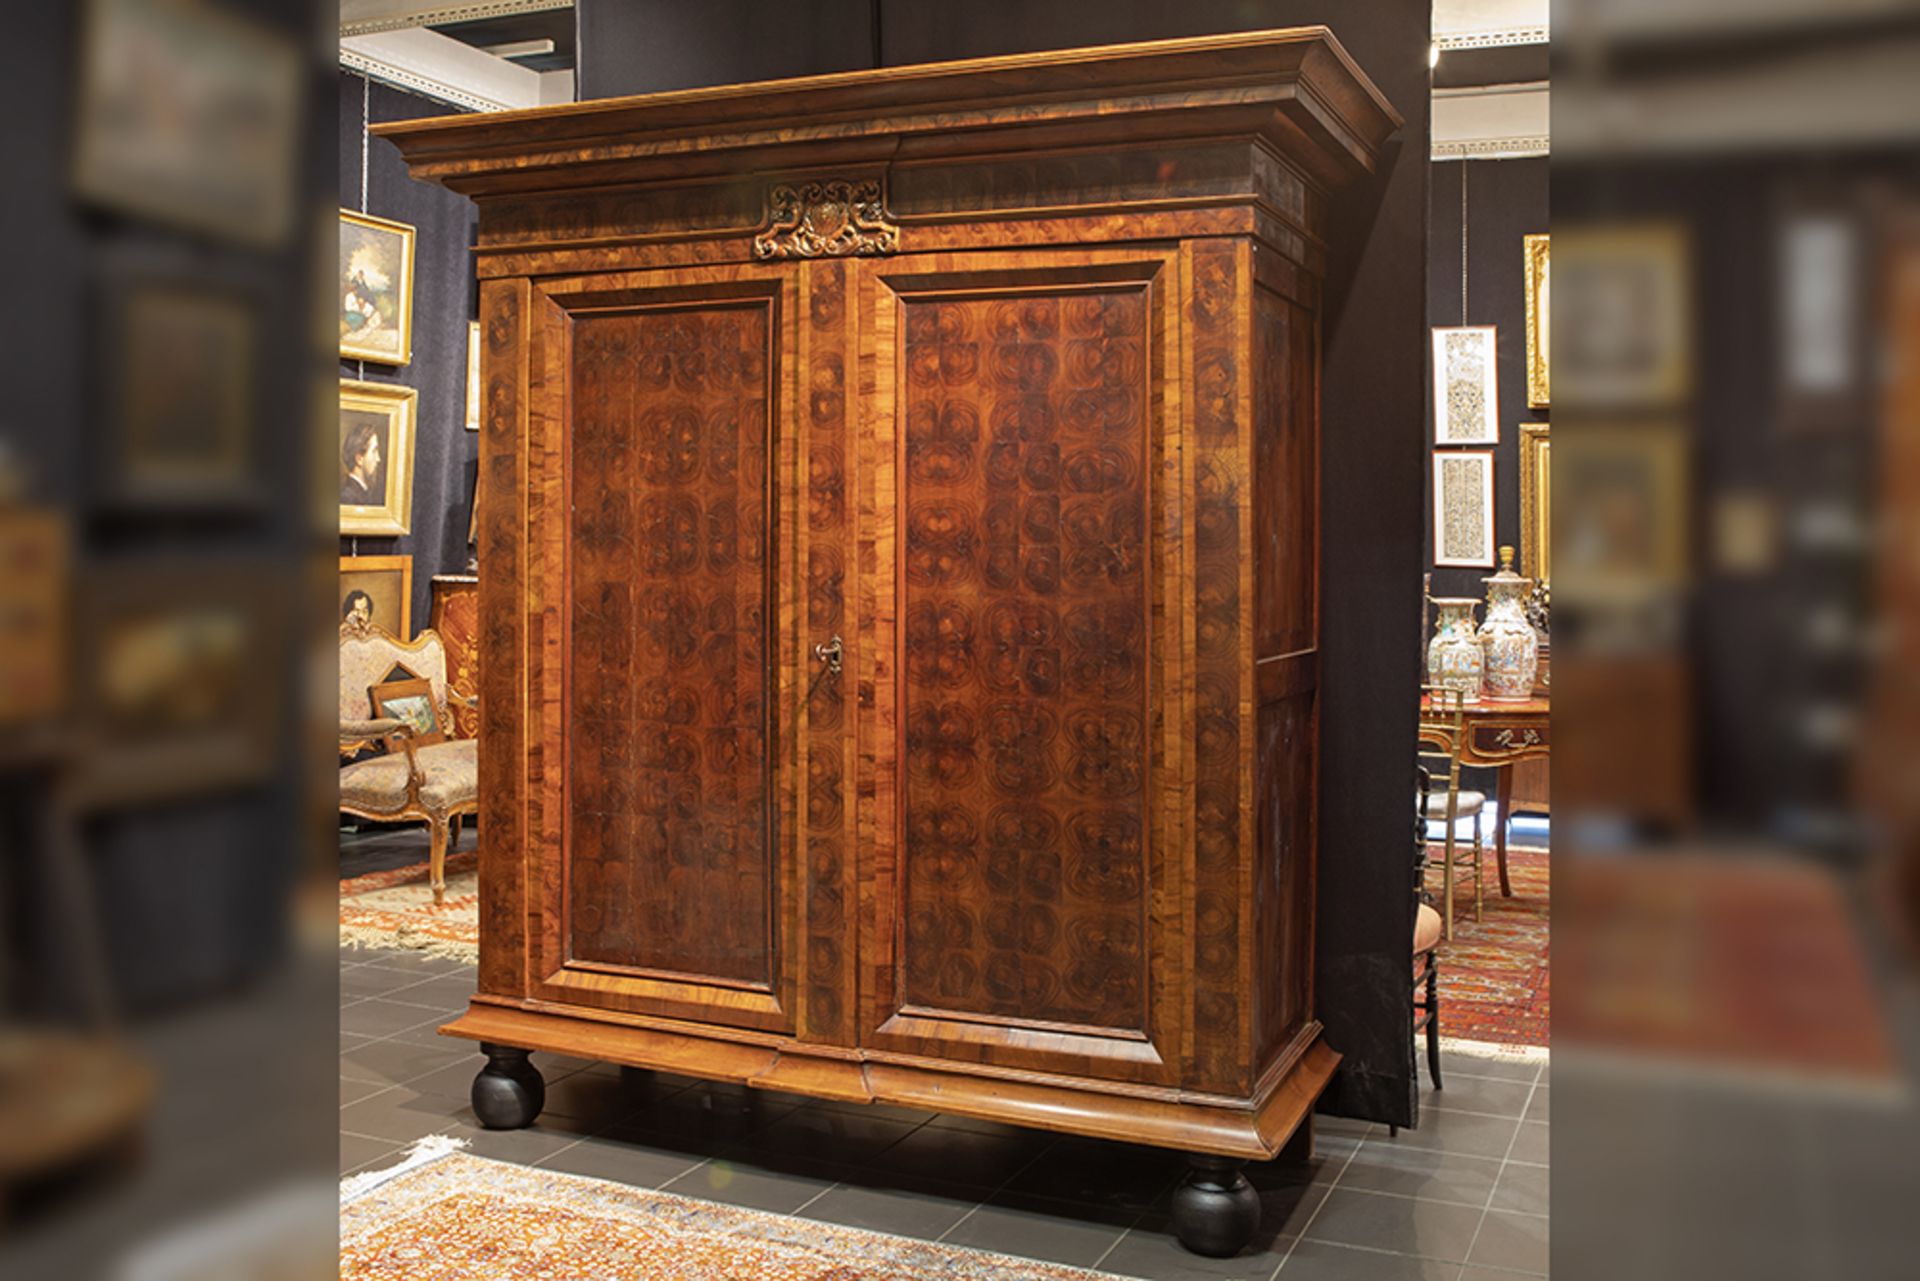 17th/18th Cent. Flemish baroque style wardrobe in cherrywood and oyster veneer - with family